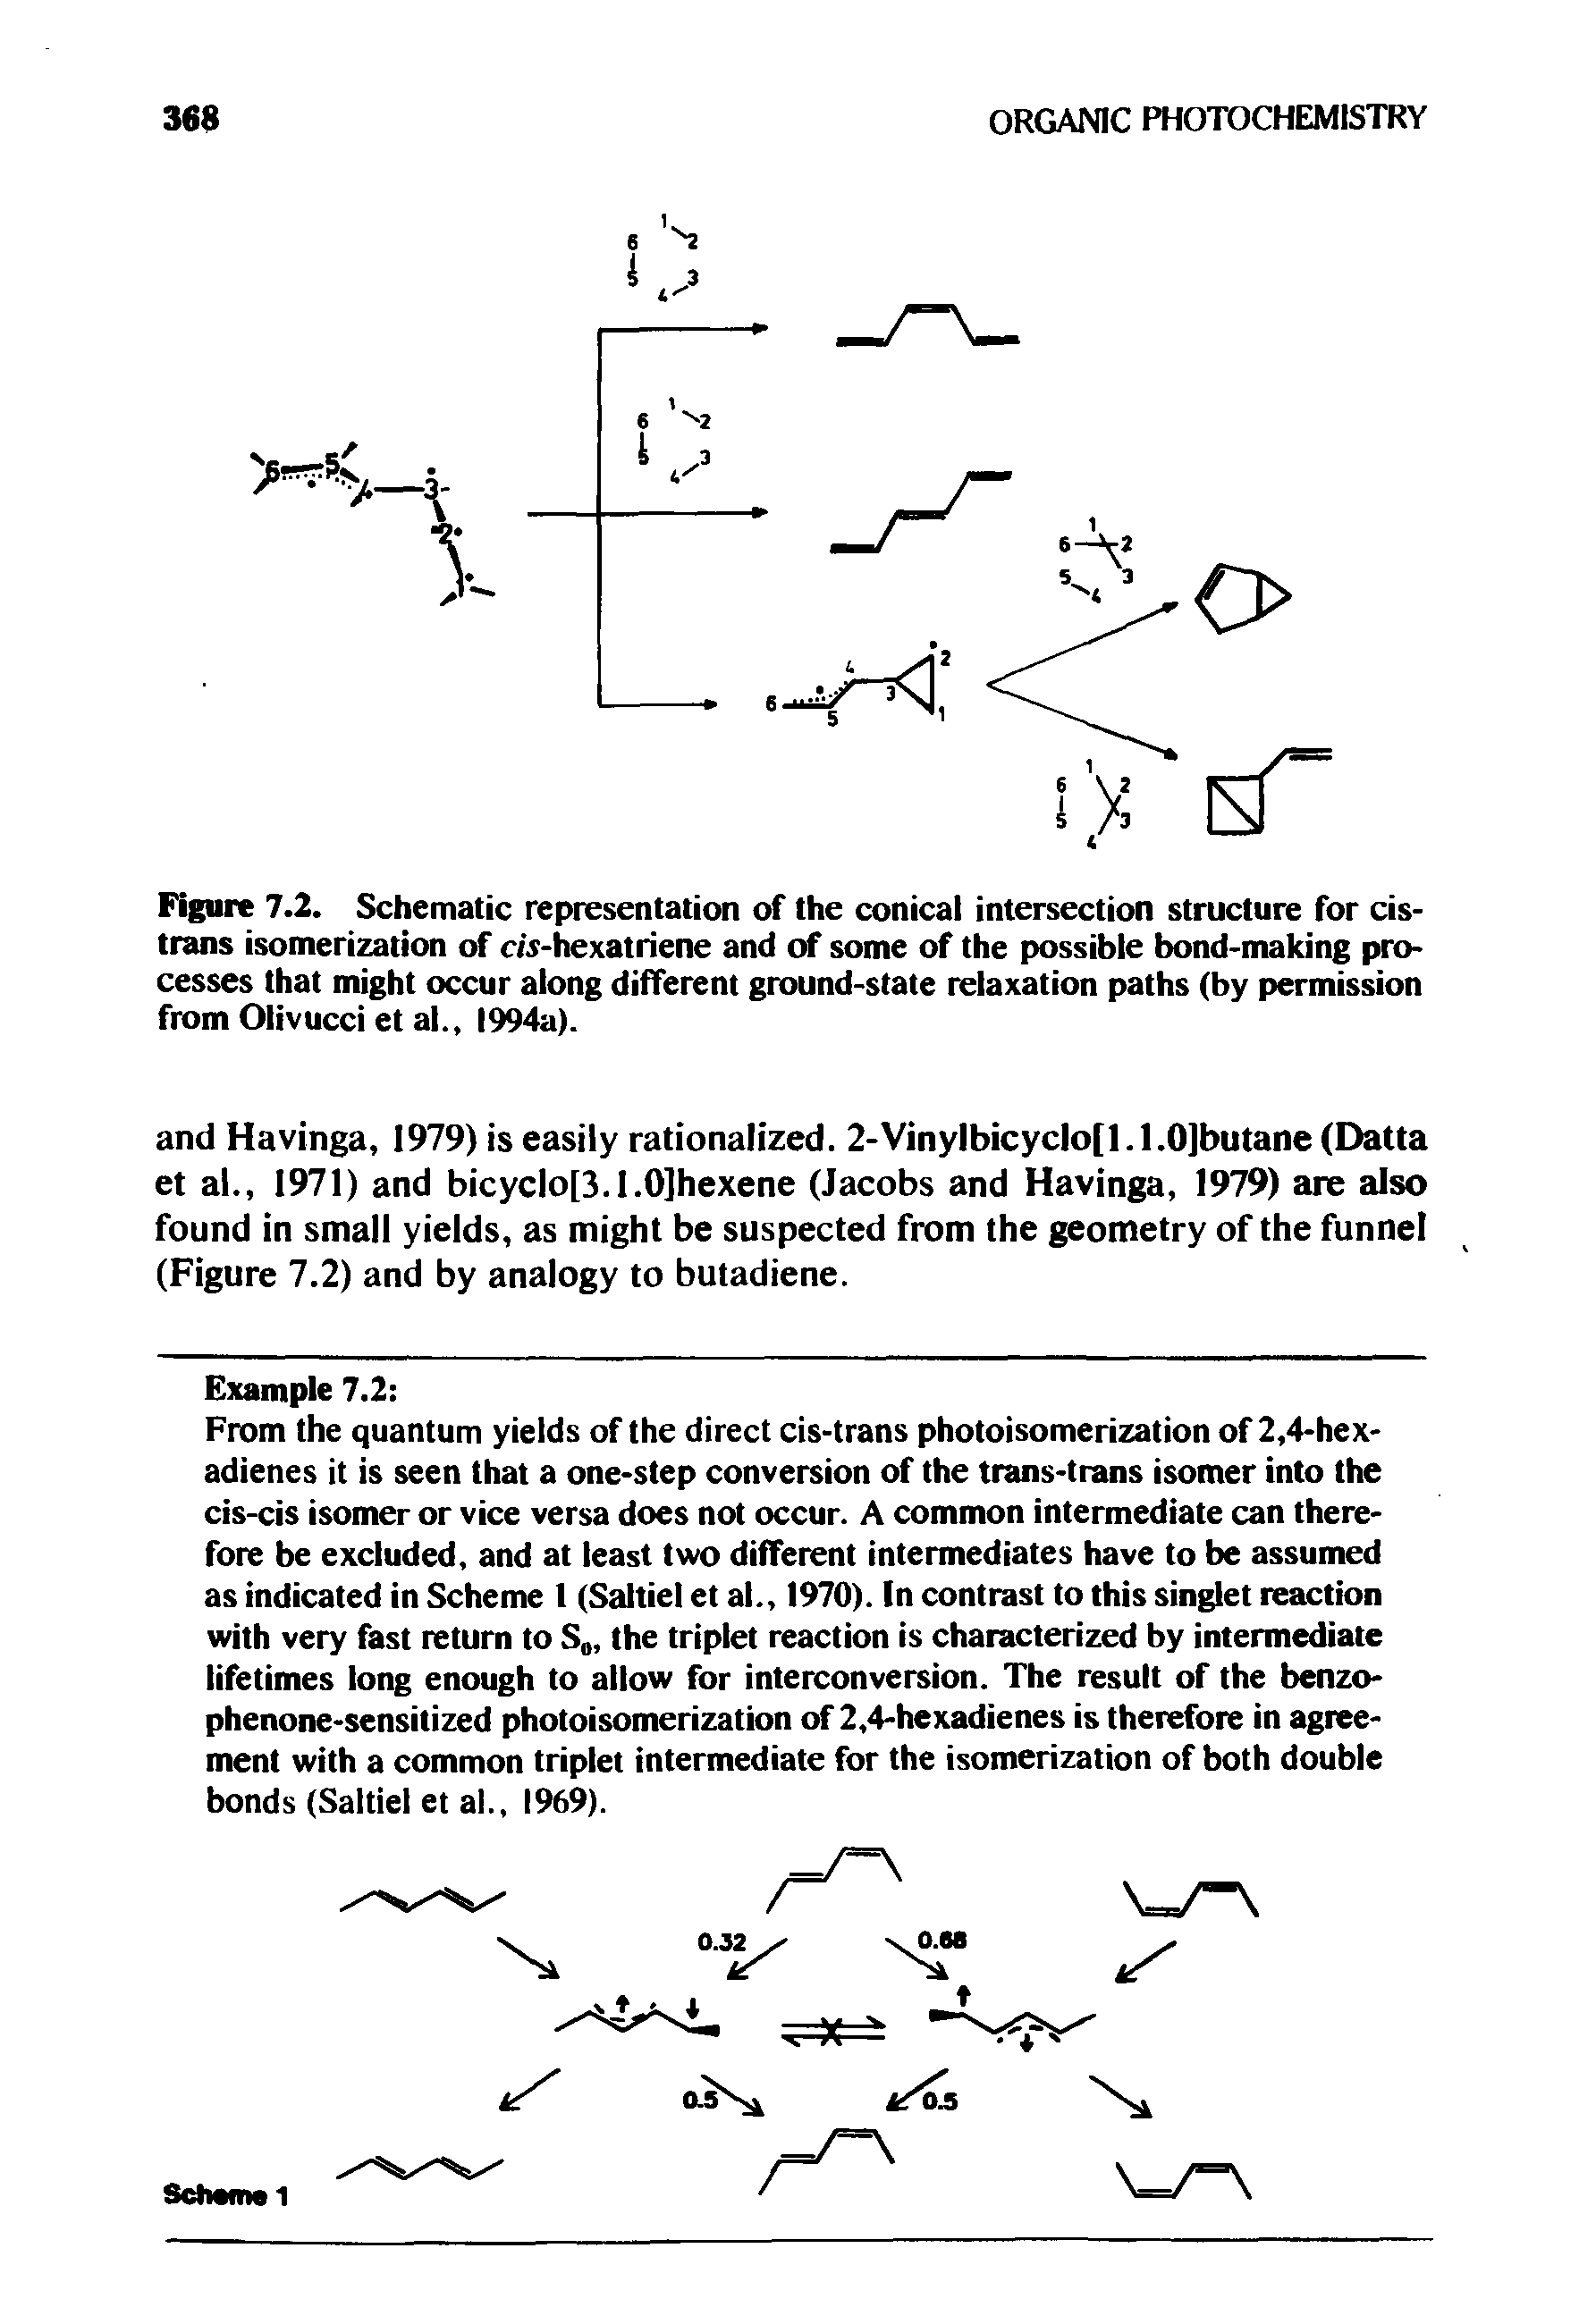 Figure 7.2. Schematic representation of the conical intersection structure for cis-trans isomerization of c -hexatriene and of some of the possible bond-making processes that might occur along different ground-state relaxation paths (by permission from Olivucci et al.. 1994a).